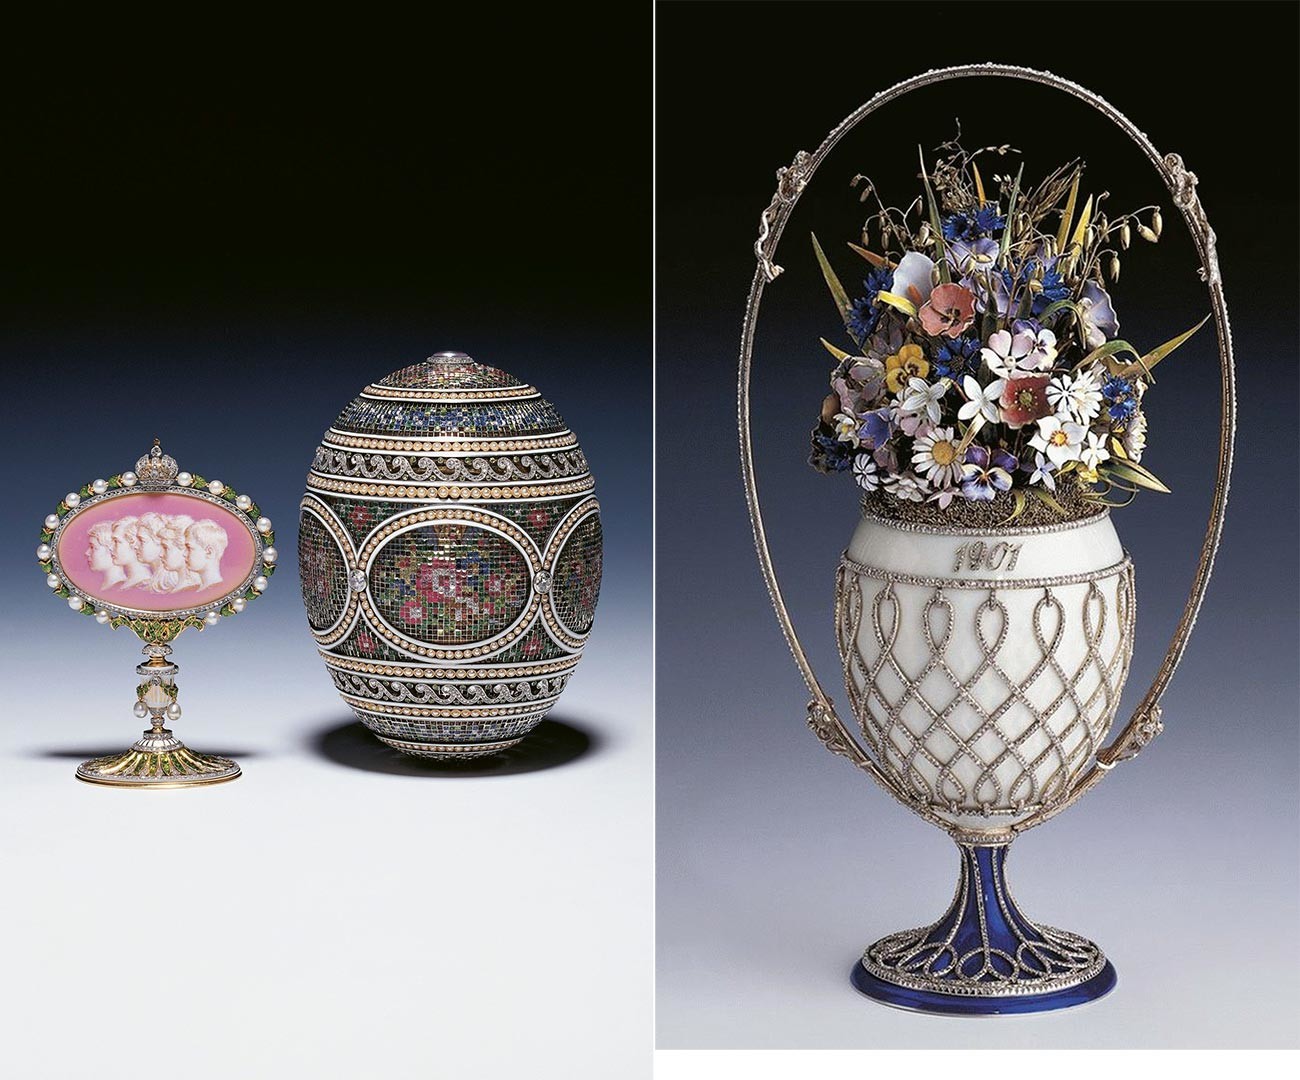 Faberge eggs: The 'Mosaic' (left) and the 'Basket of Wildflowers' 